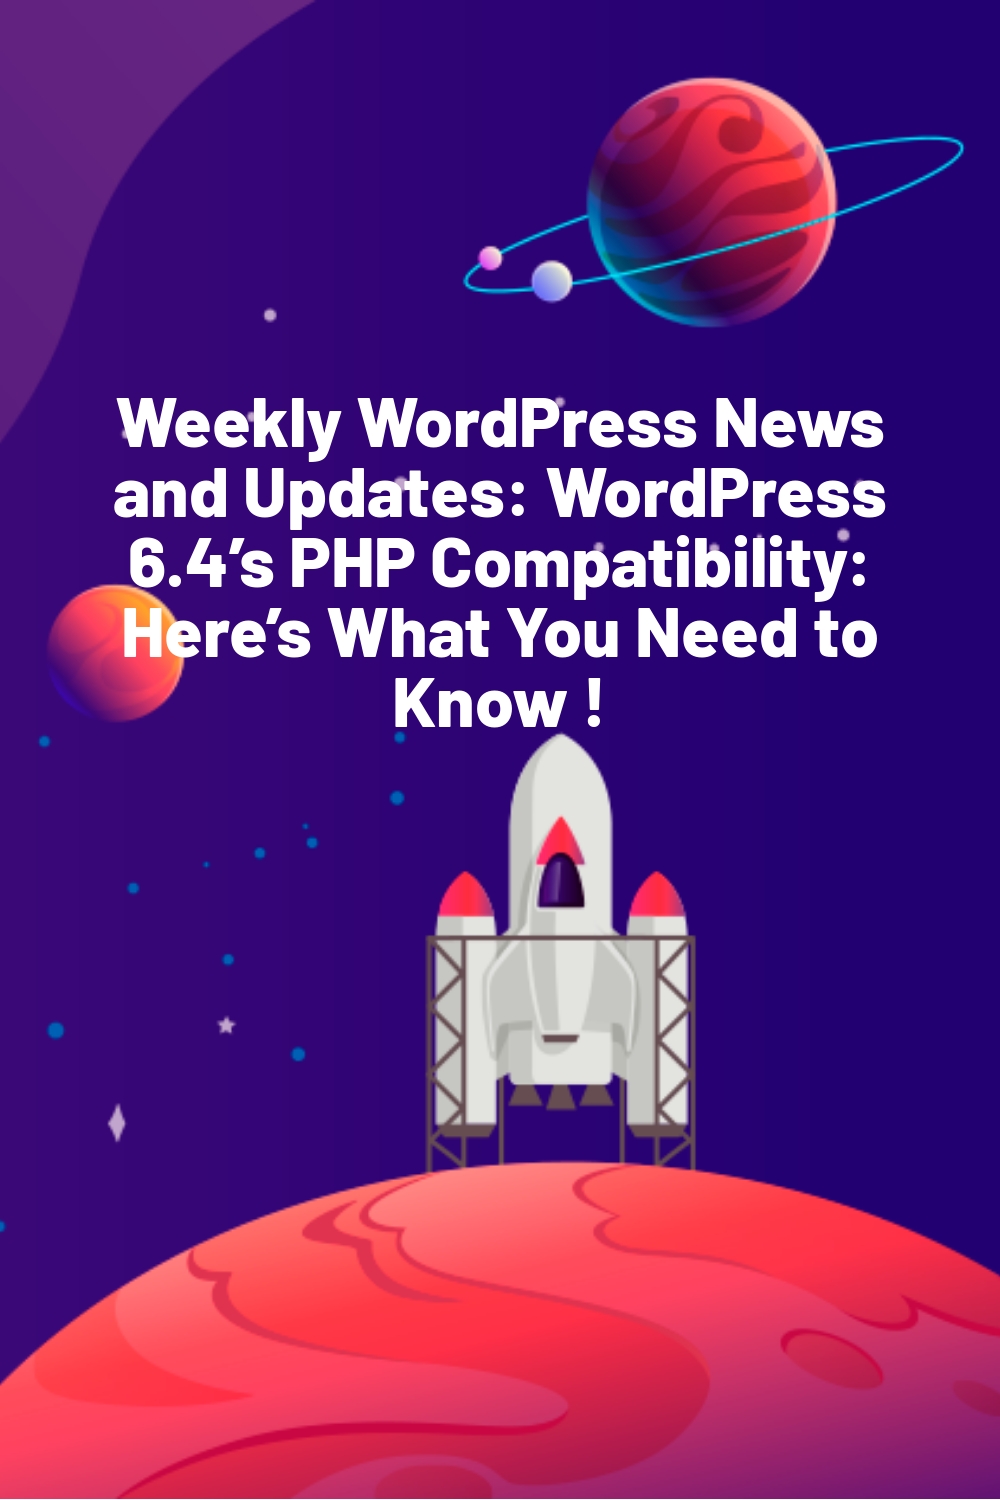 Weekly WordPress News and Updates: WordPress 6.4’s PHP Compatibility: Here’s What You Need to Know !